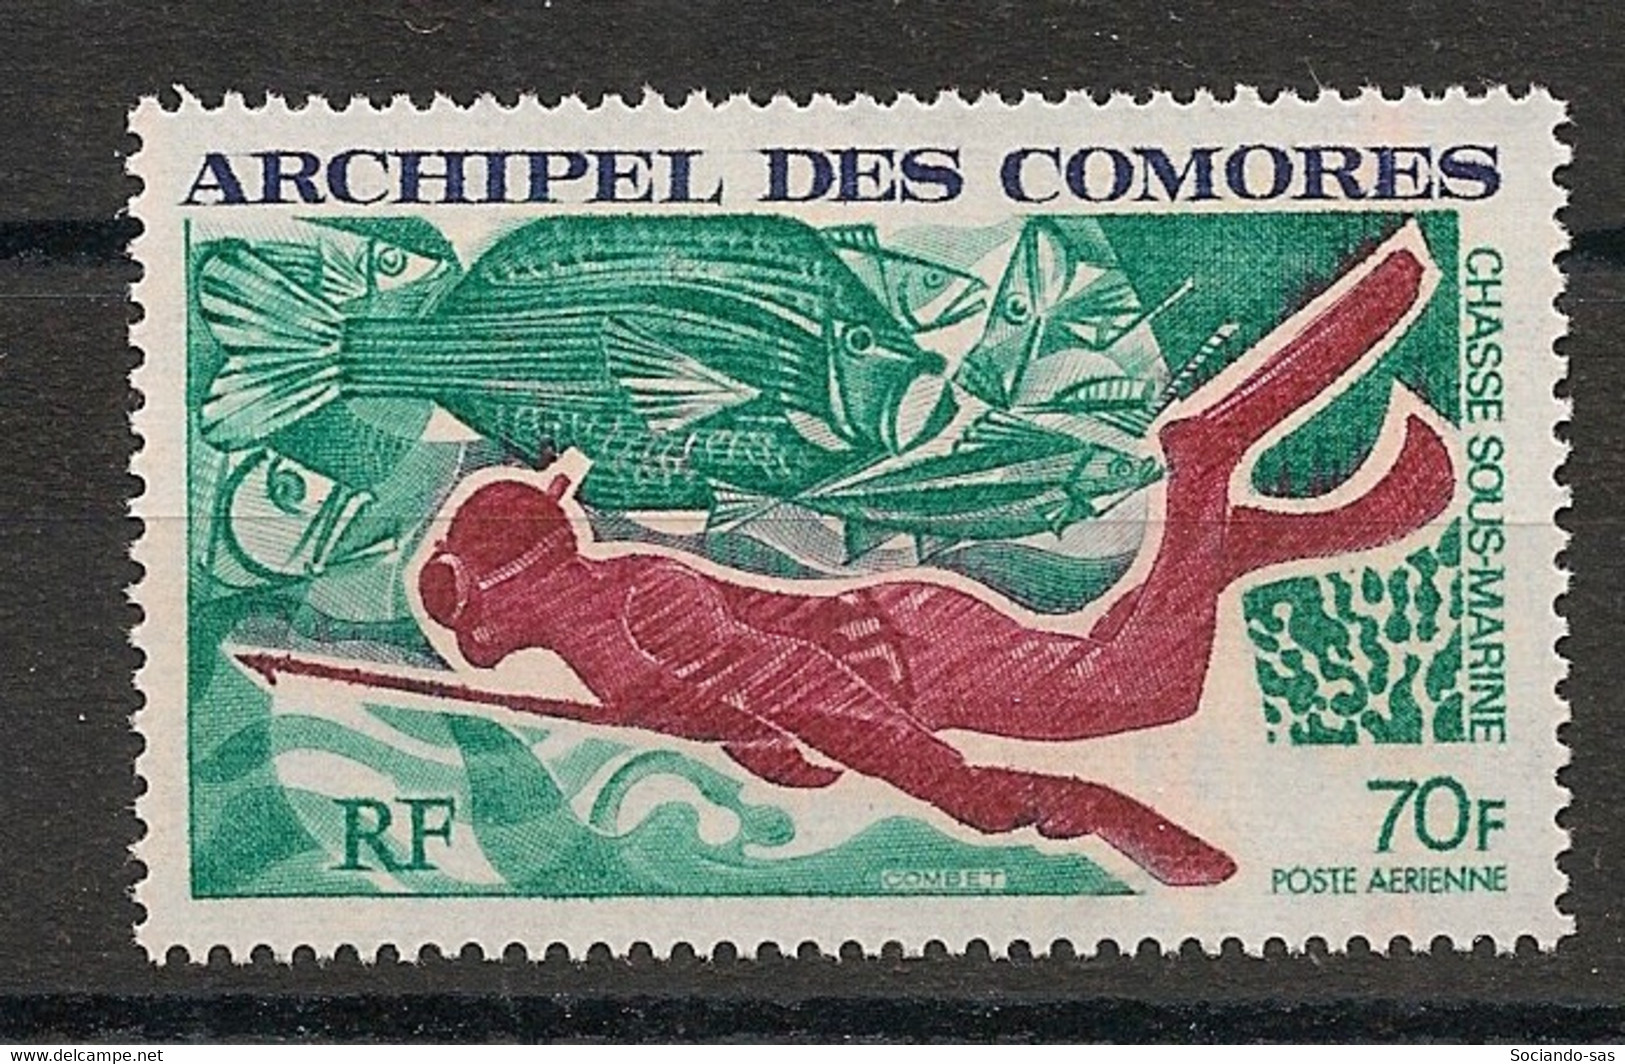 COMORES - 1972 - Poste Aérienne PA N°Yv. 44 - Plongée / Diving - Neuf Luxe ** / MNH / Postfrisch - Immersione